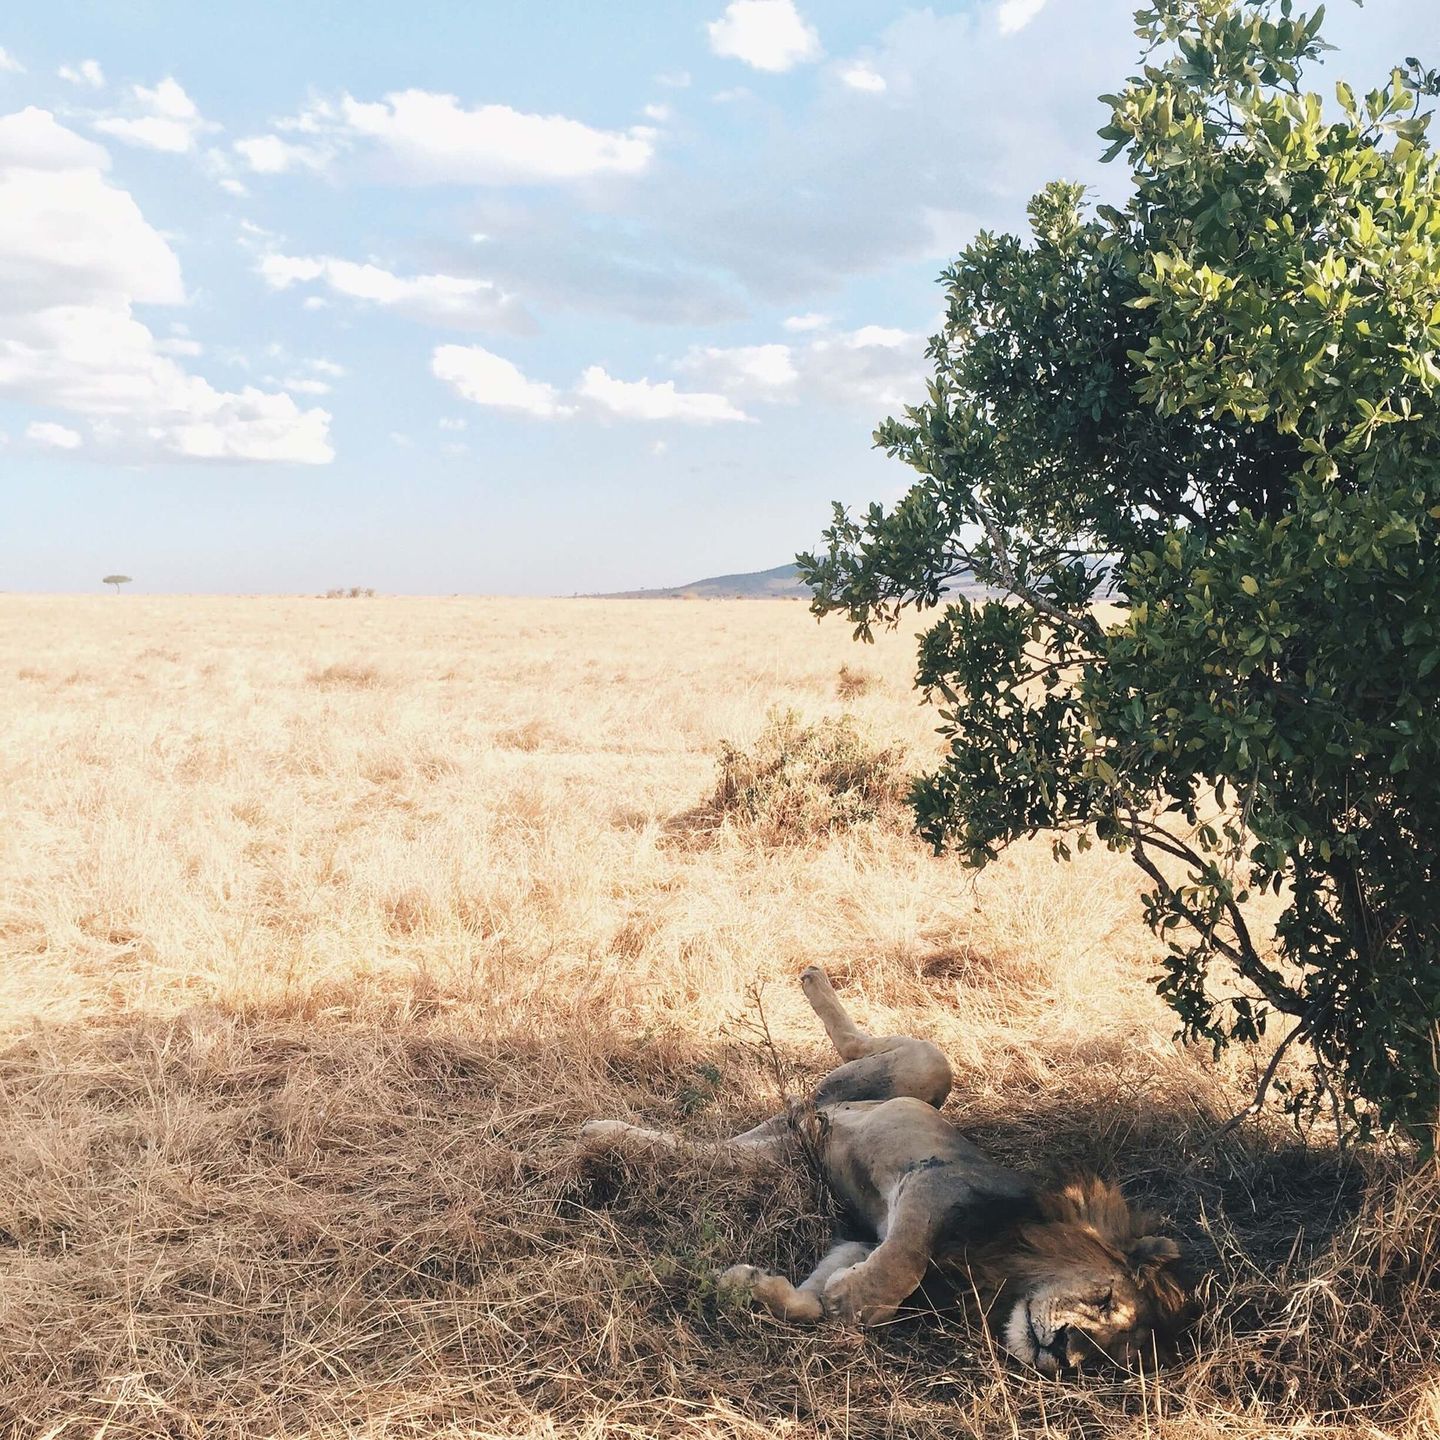 A lion laying on its back under a tree in a field